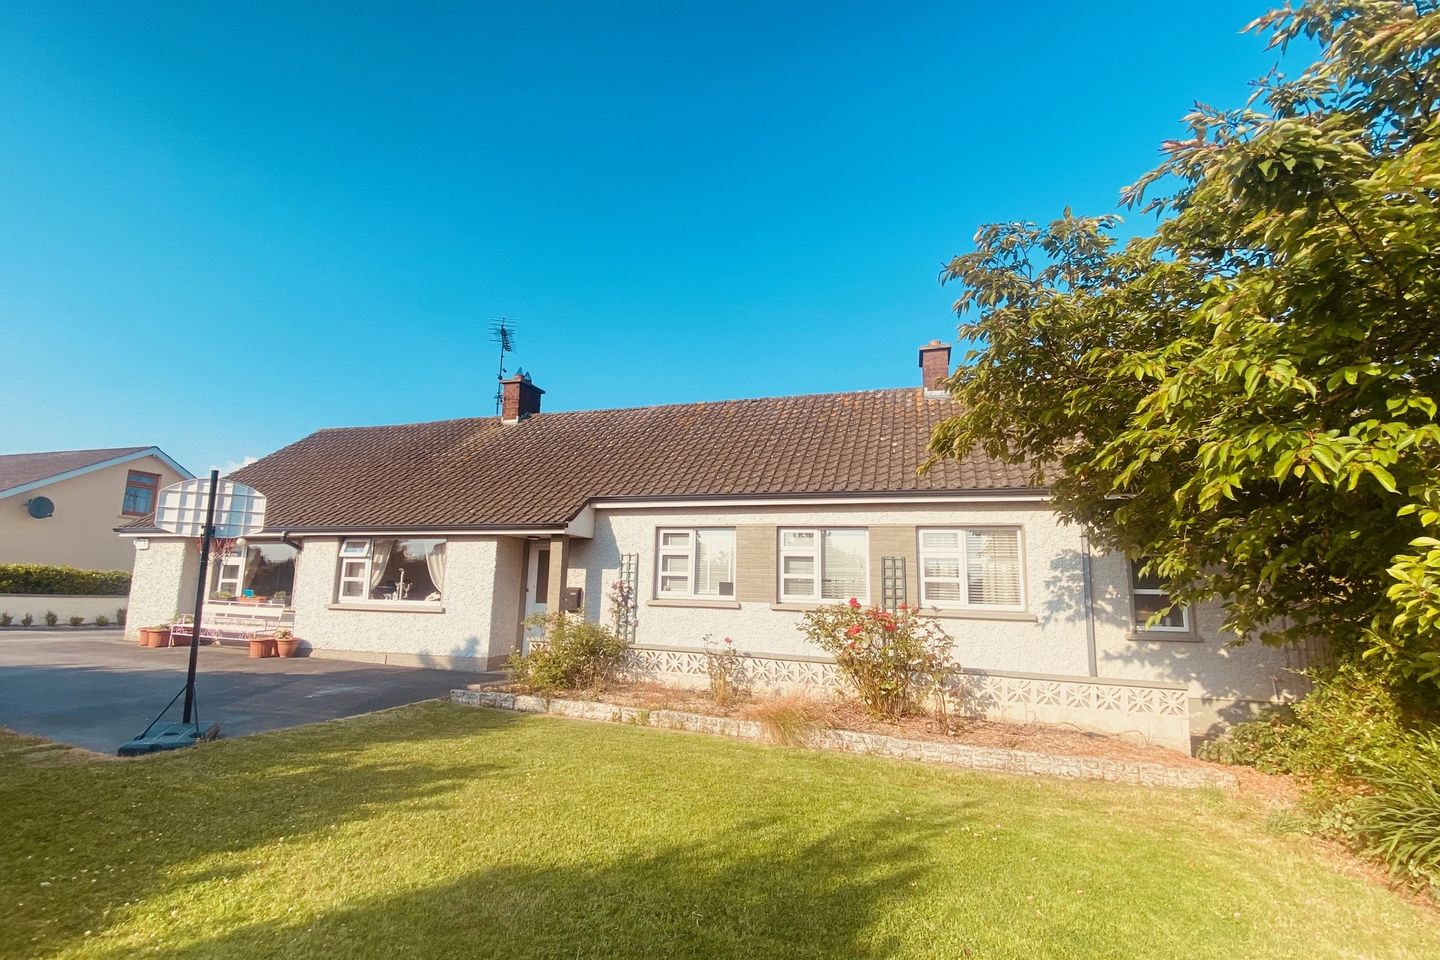 Littlemills Road, Donaghmore, Dundalk, Co. Louth, A91VX3V